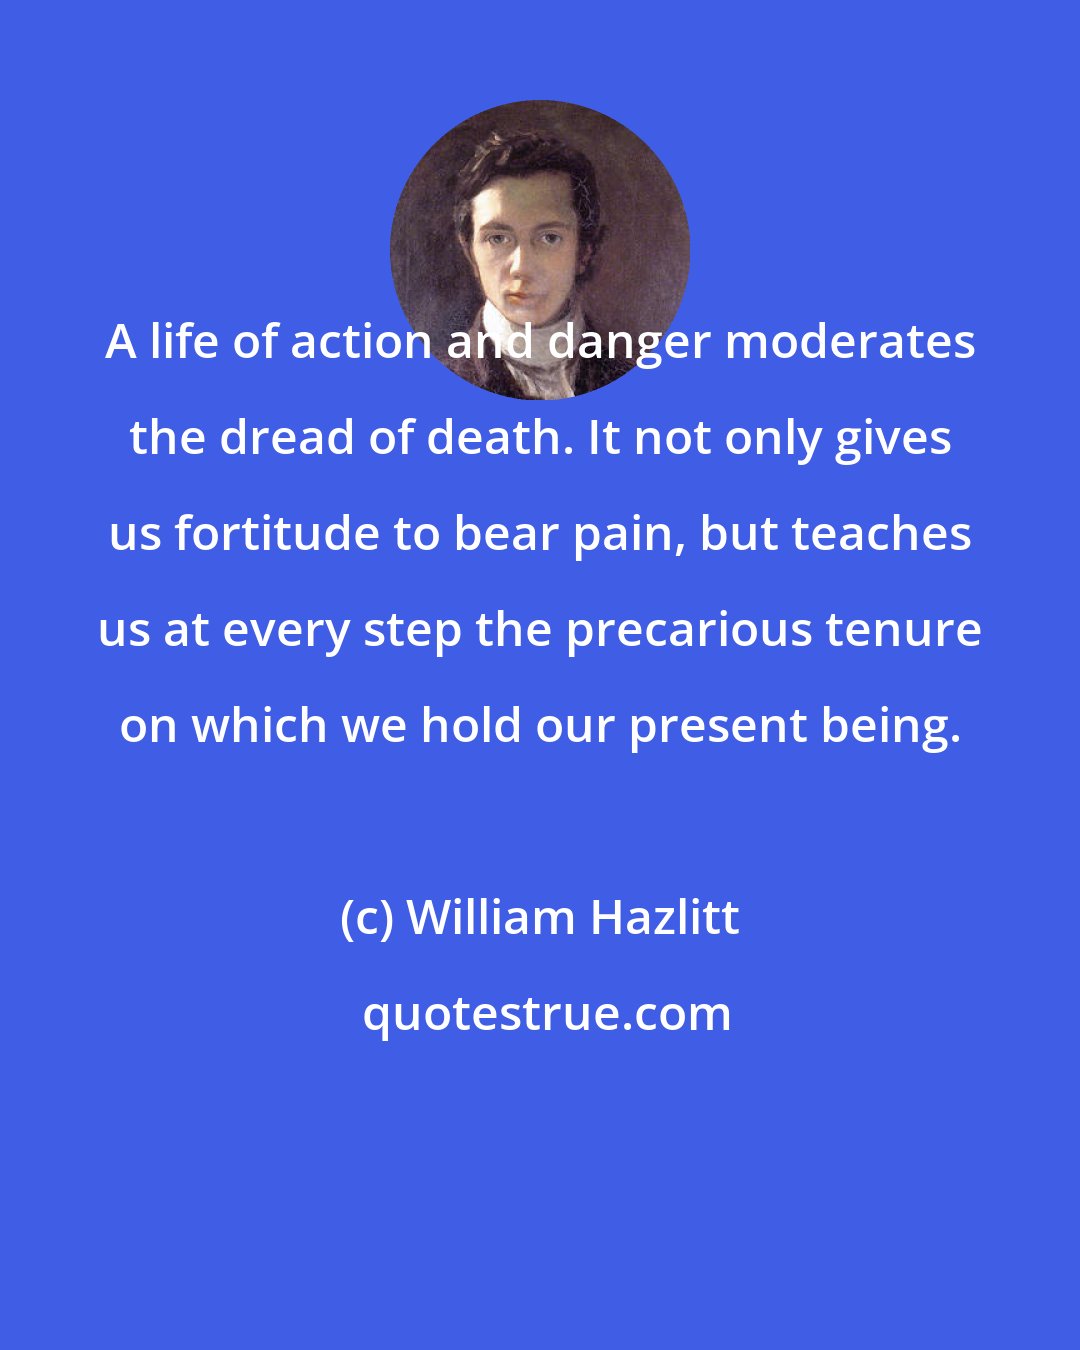 William Hazlitt: A life of action and danger moderates the dread of death. It not only gives us fortitude to bear pain, but teaches us at every step the precarious tenure on which we hold our present being.